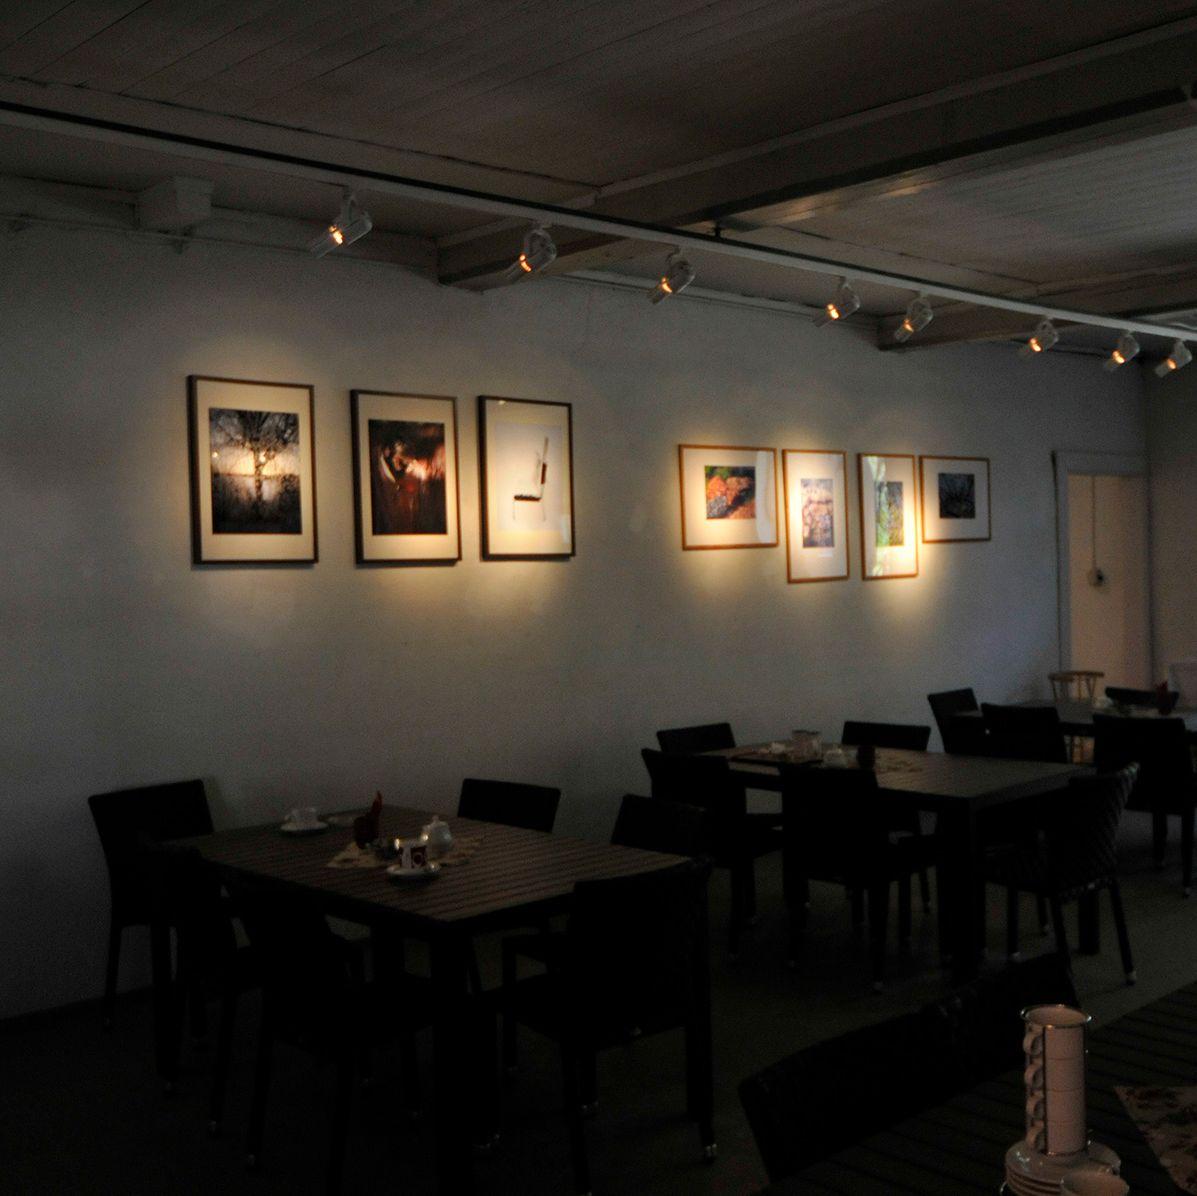 The interior of Söderlångvik Manor cafe, featuring tables and chairs and artworks on the wall.